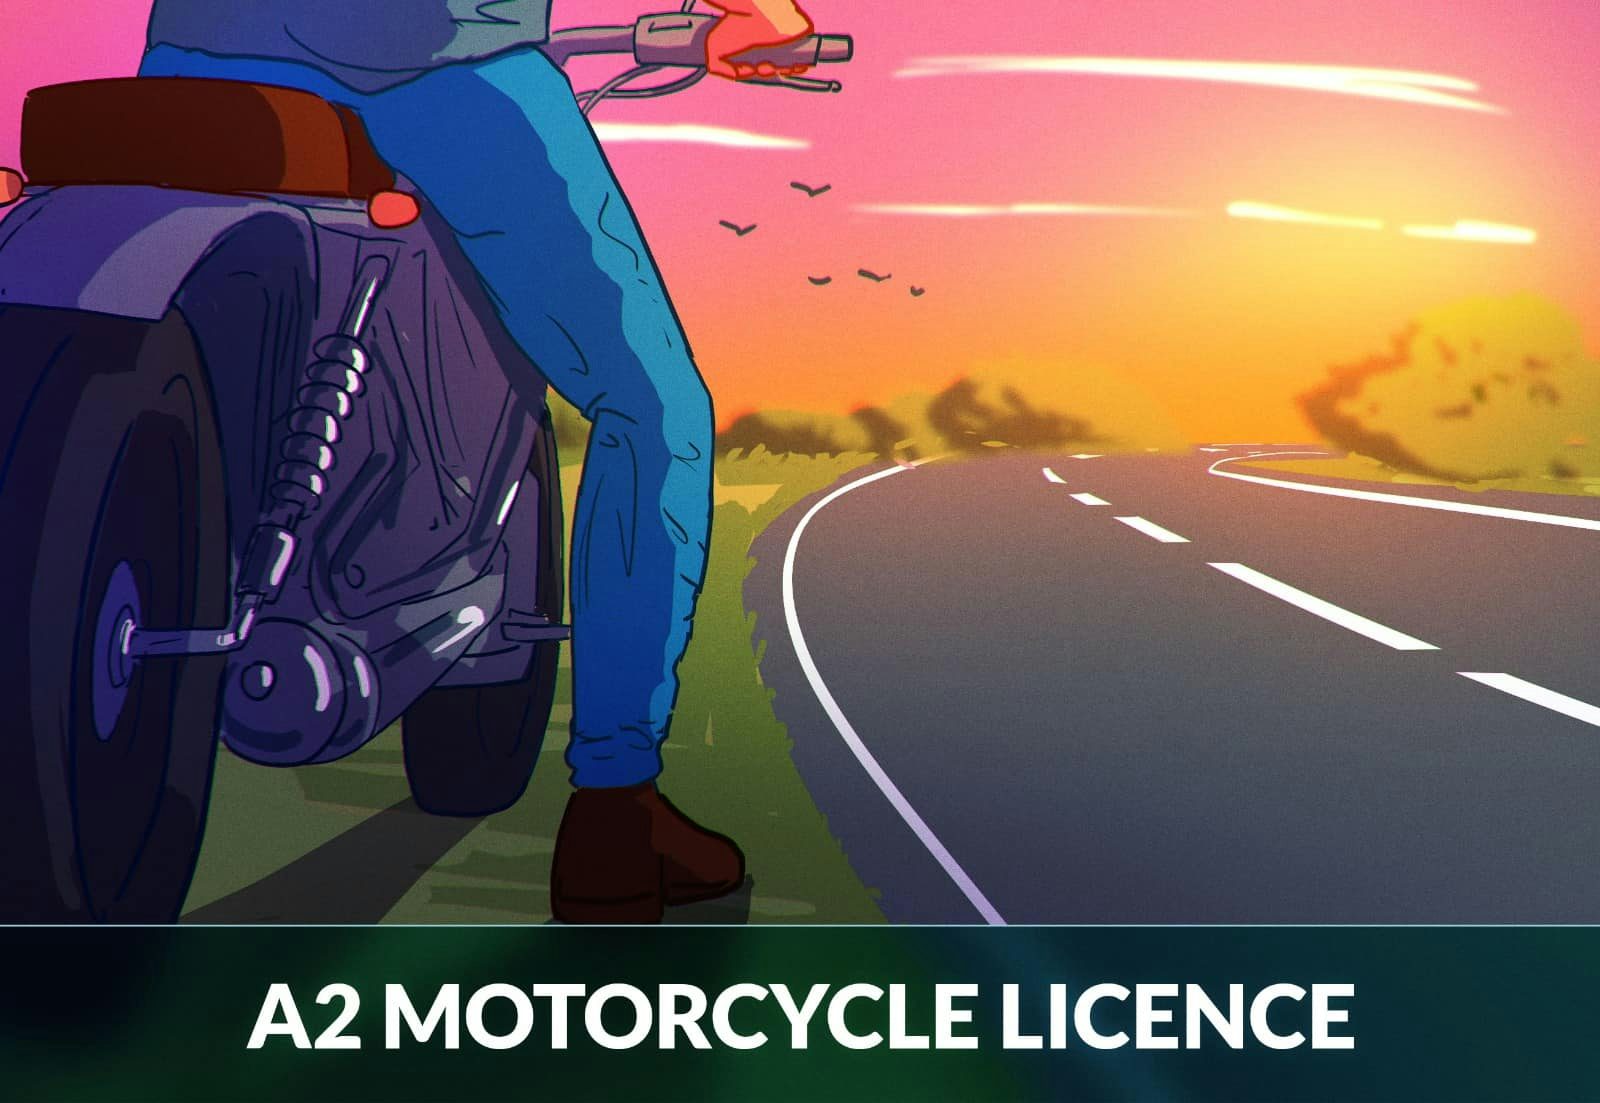 A2 motorcycle licence